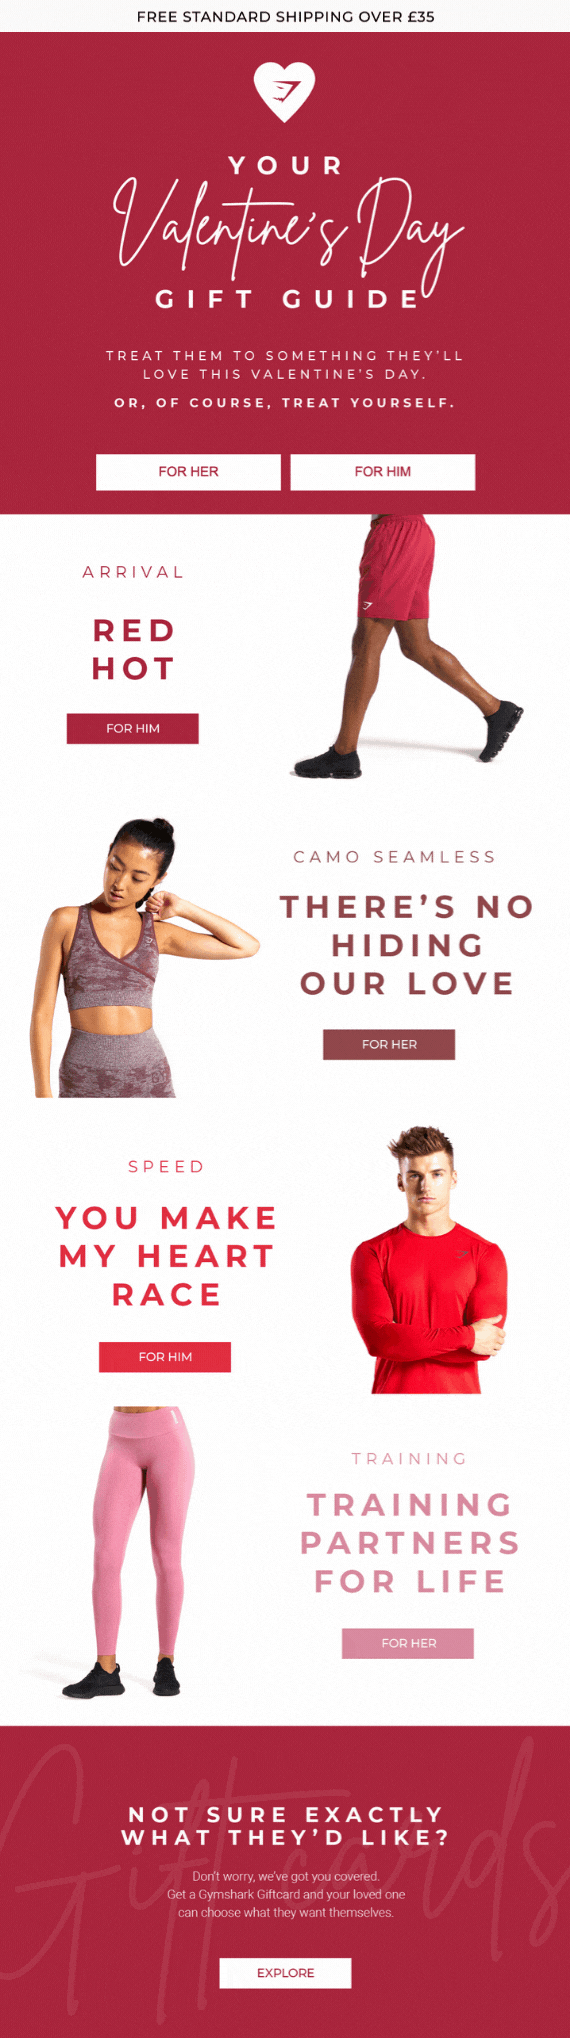 Gymshark Valentine's Day gift guide idea